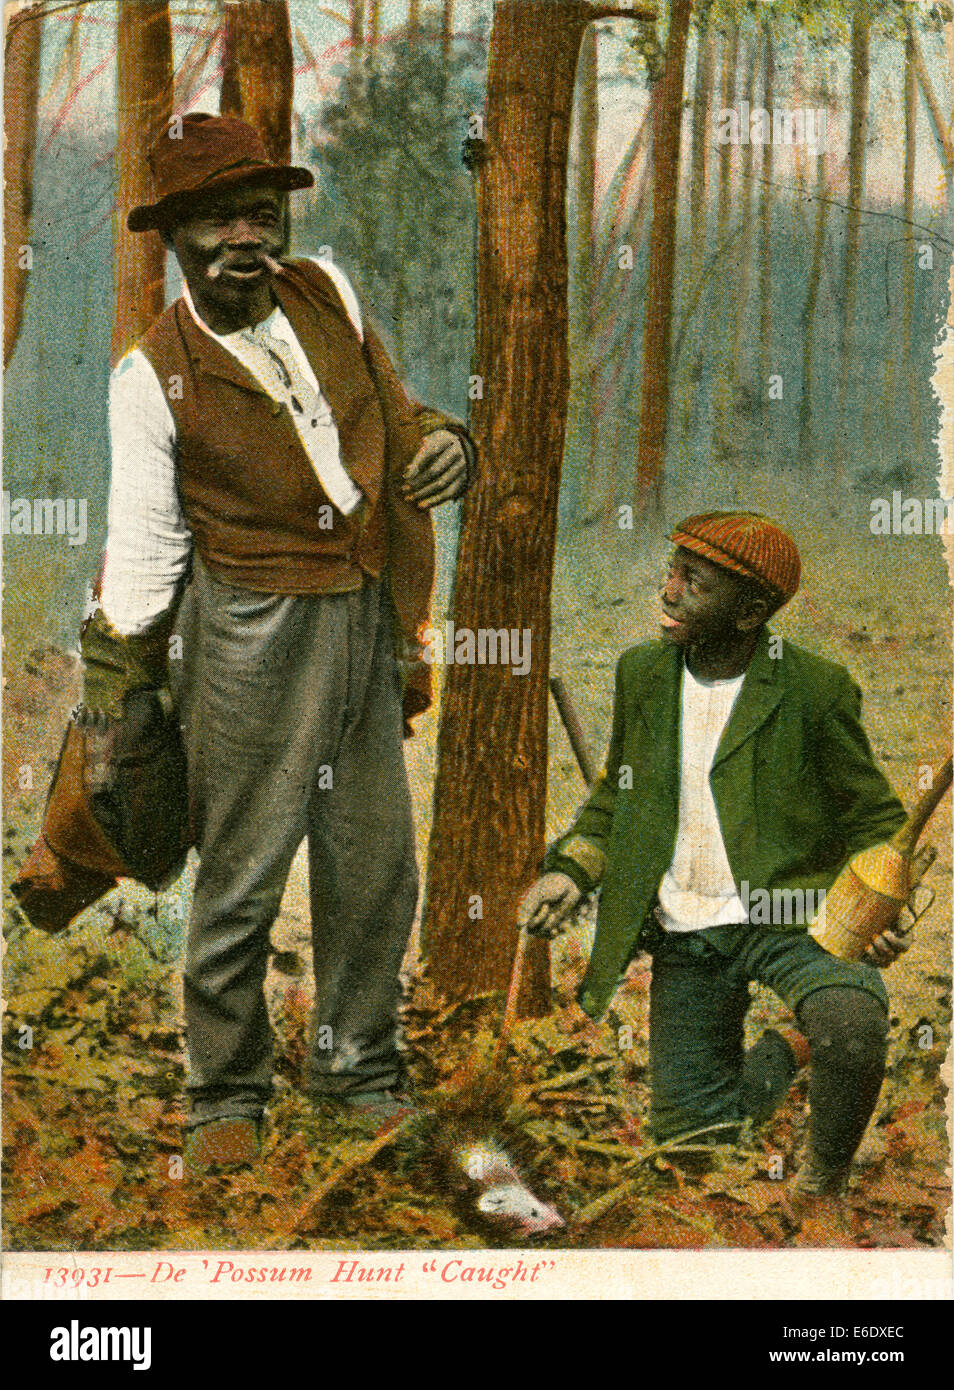 African-American Man and Boy with Snared Opossum, Series 13931, 'De 'Possum Hunt - Caught', USA, Hand-Colored Postcard, circa Stock Photo